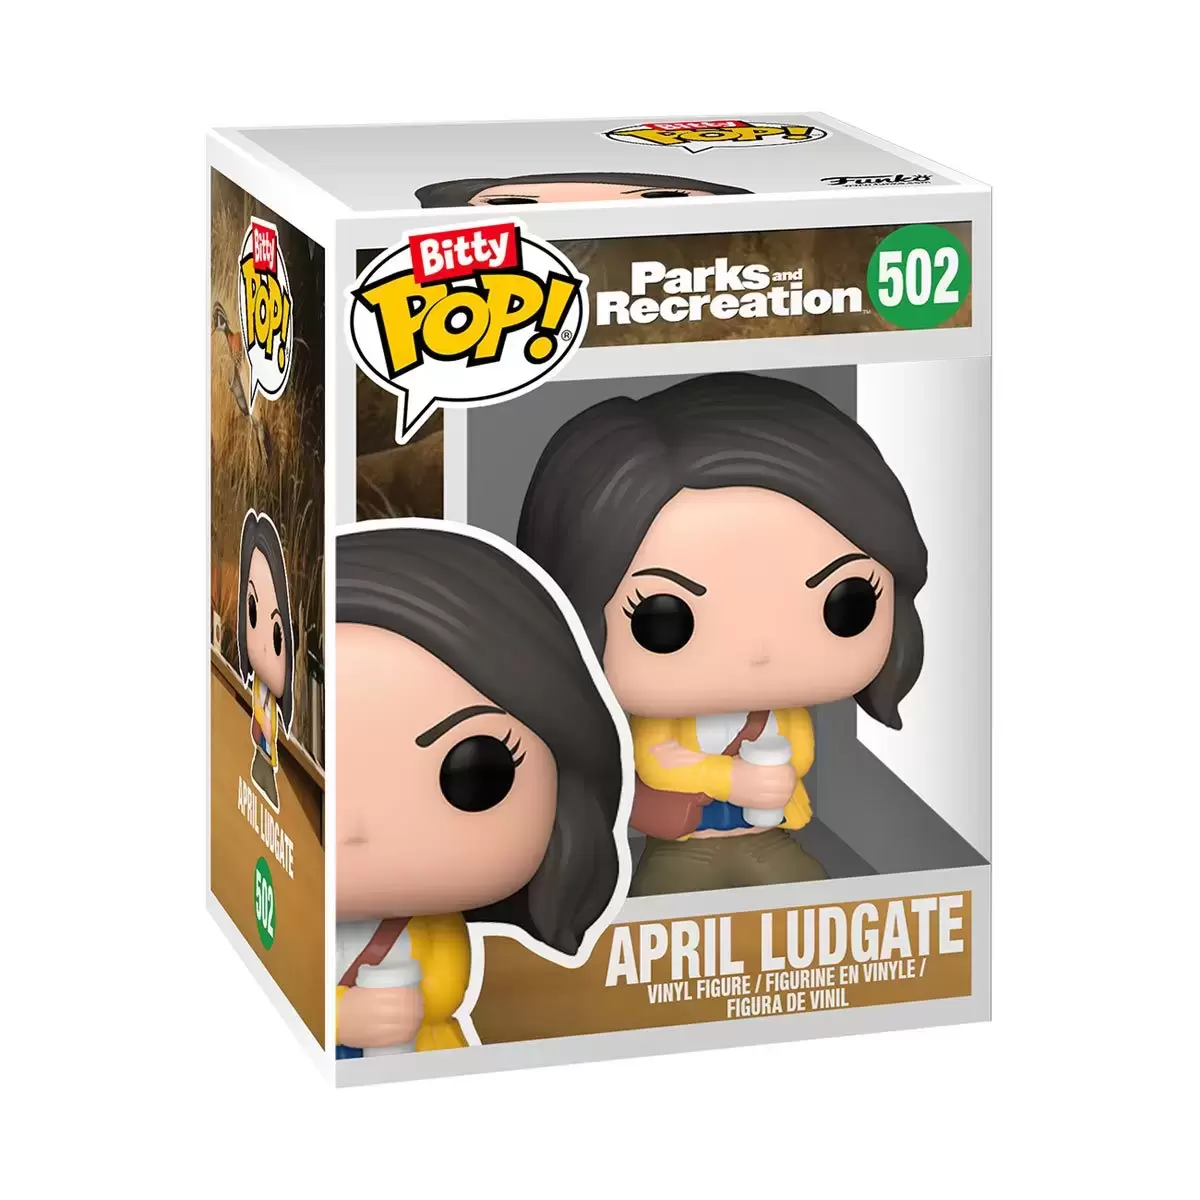 Bitty POP! - Parks And Recreation - April Ludgate